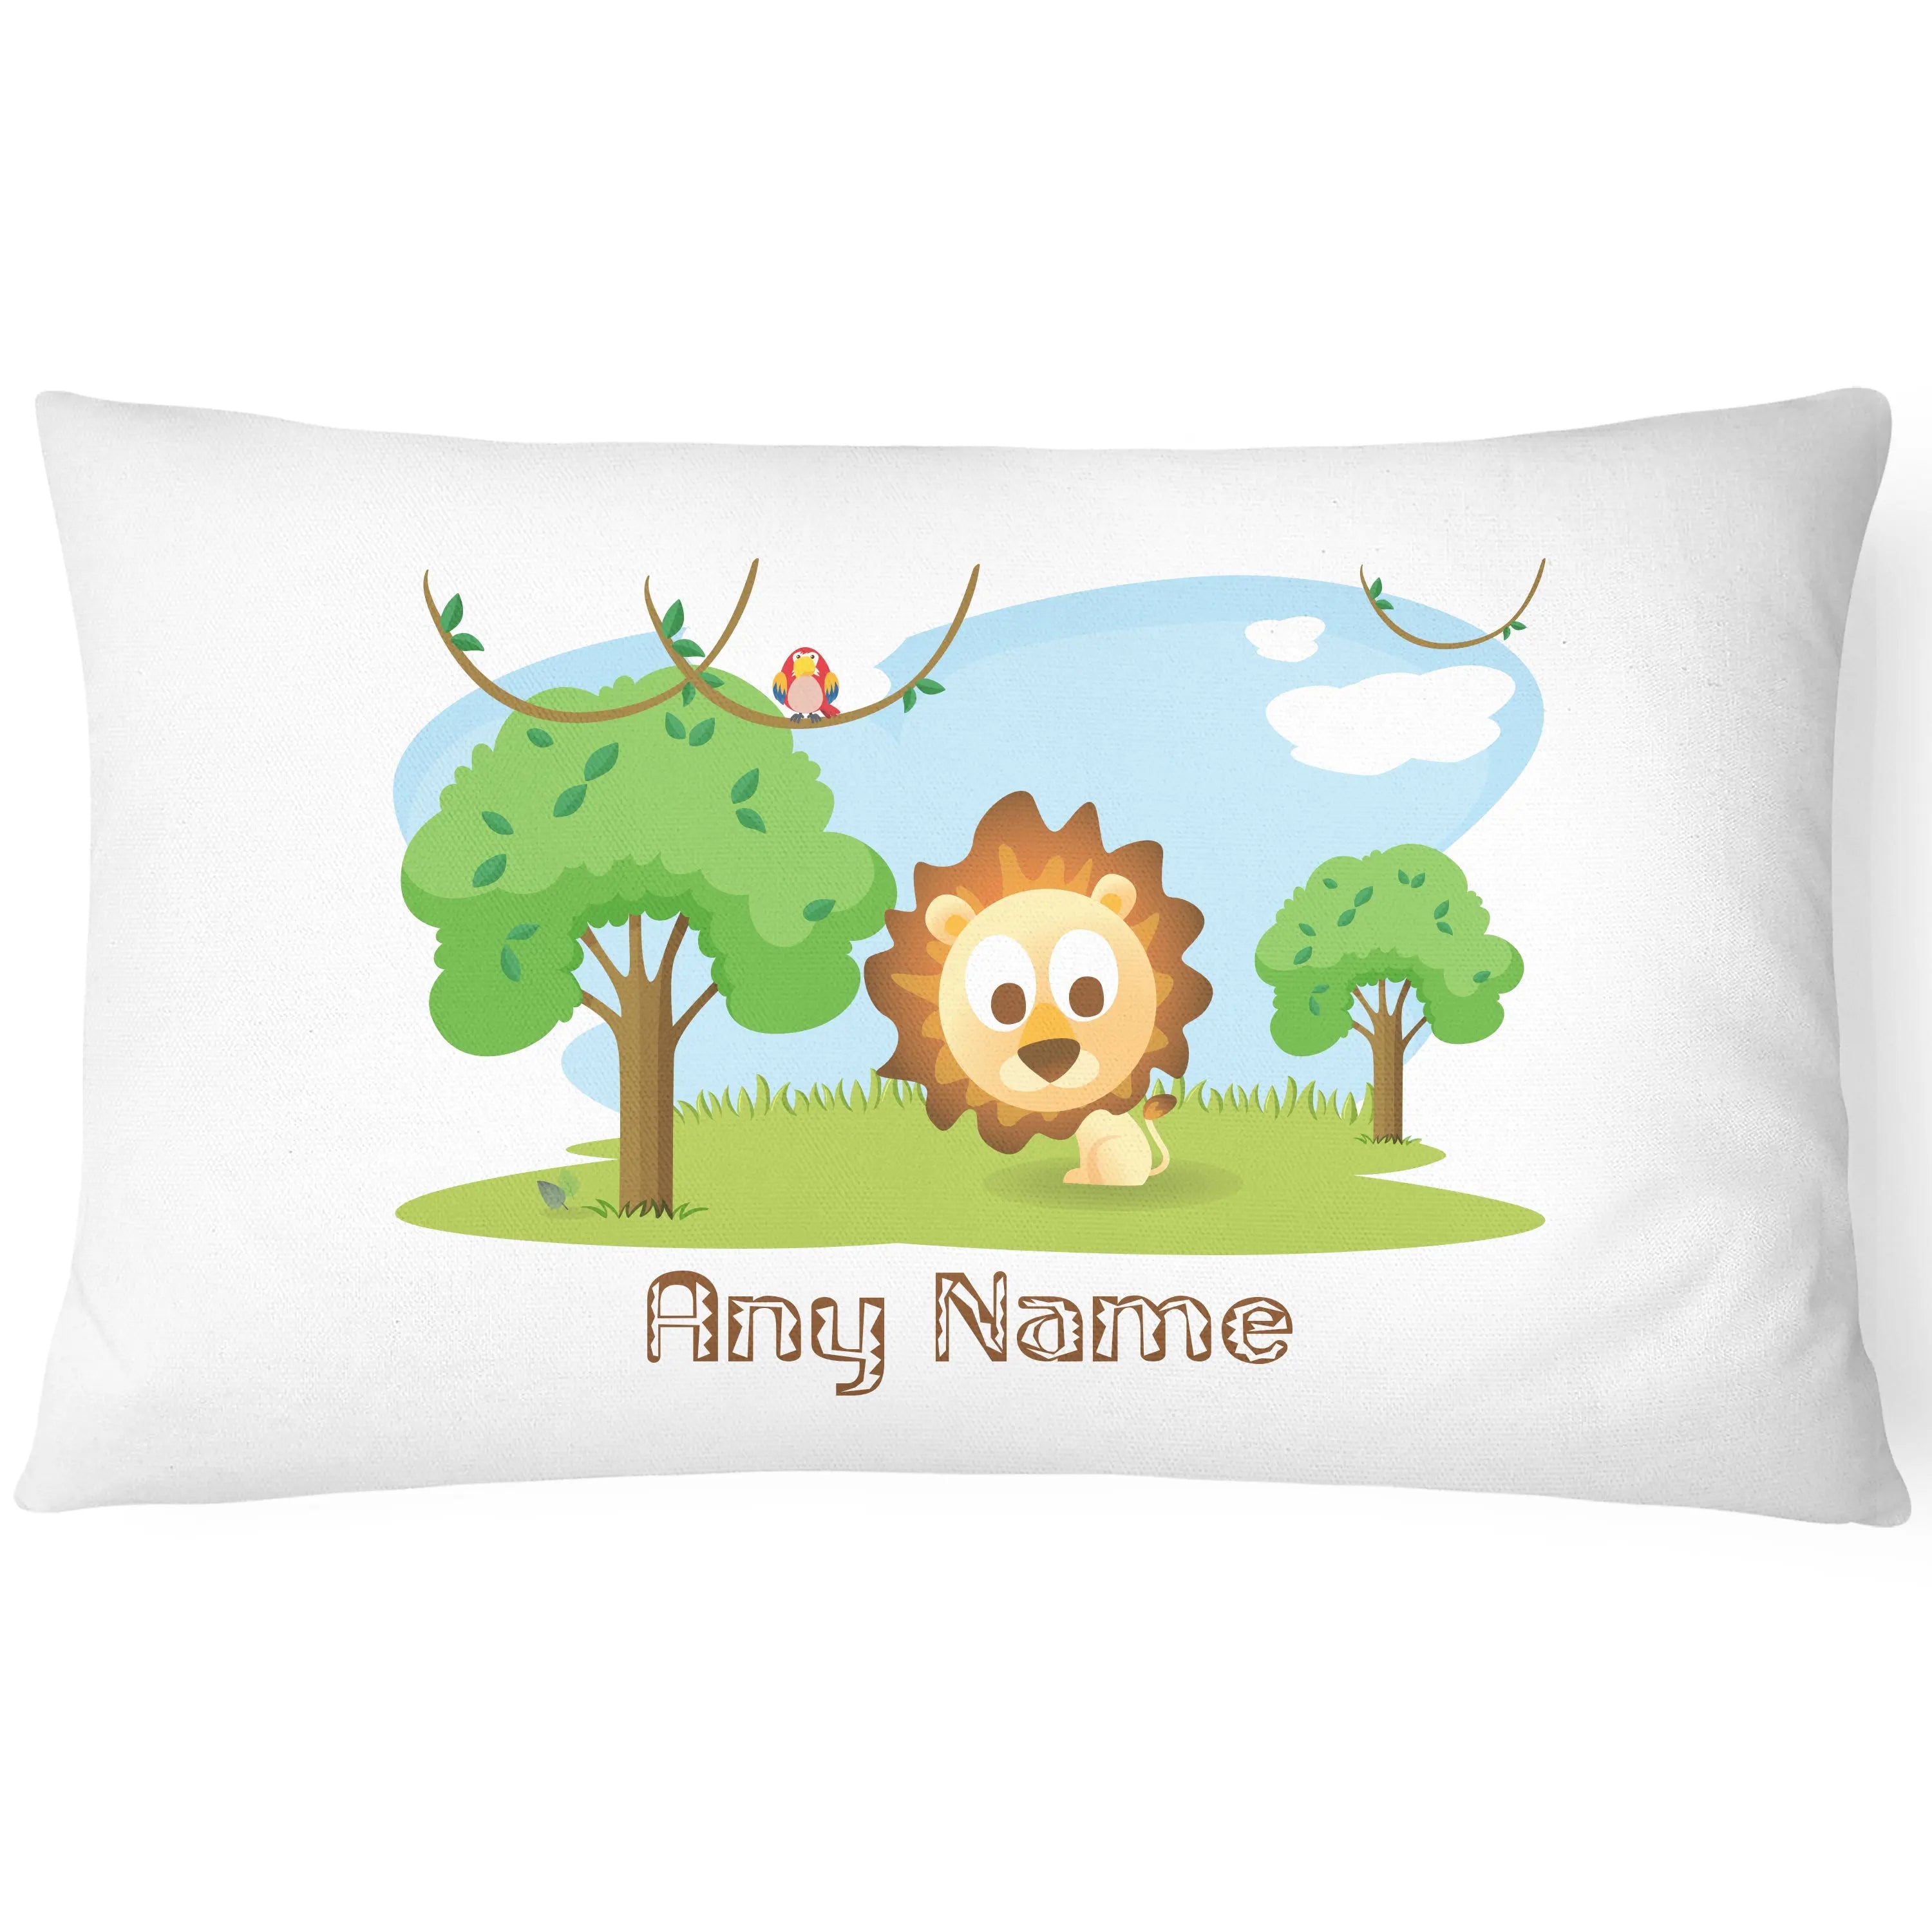 Cute Animal Zoo - Children's Pillowcase - Personalise with Any Name - Lion